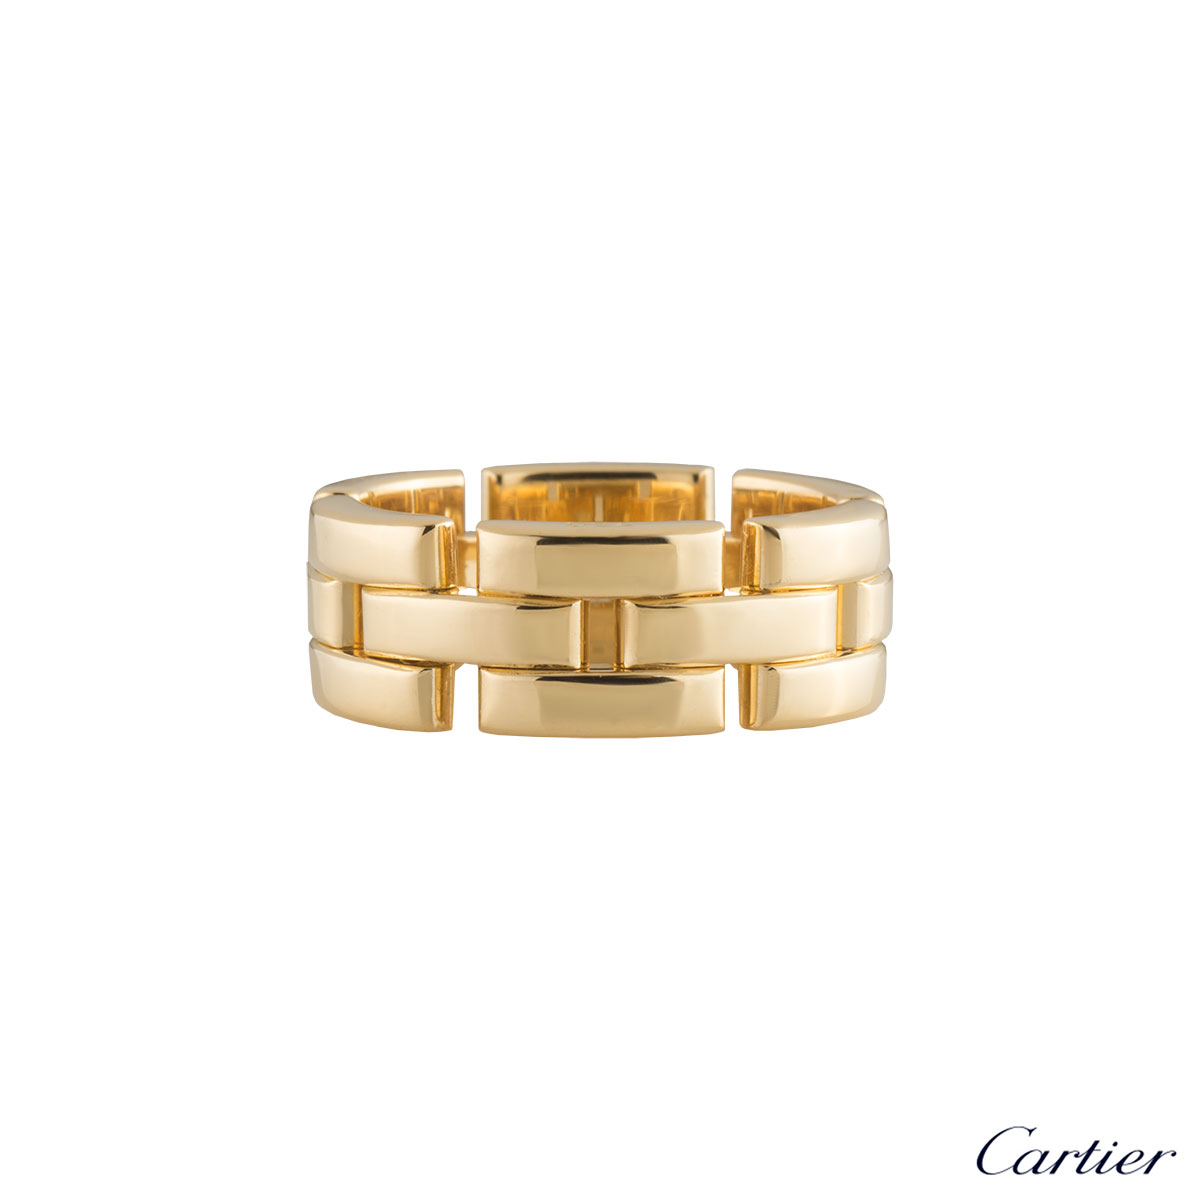 Cartier Yellow Gold Maillon Panthere Ring | Rich Diamonds